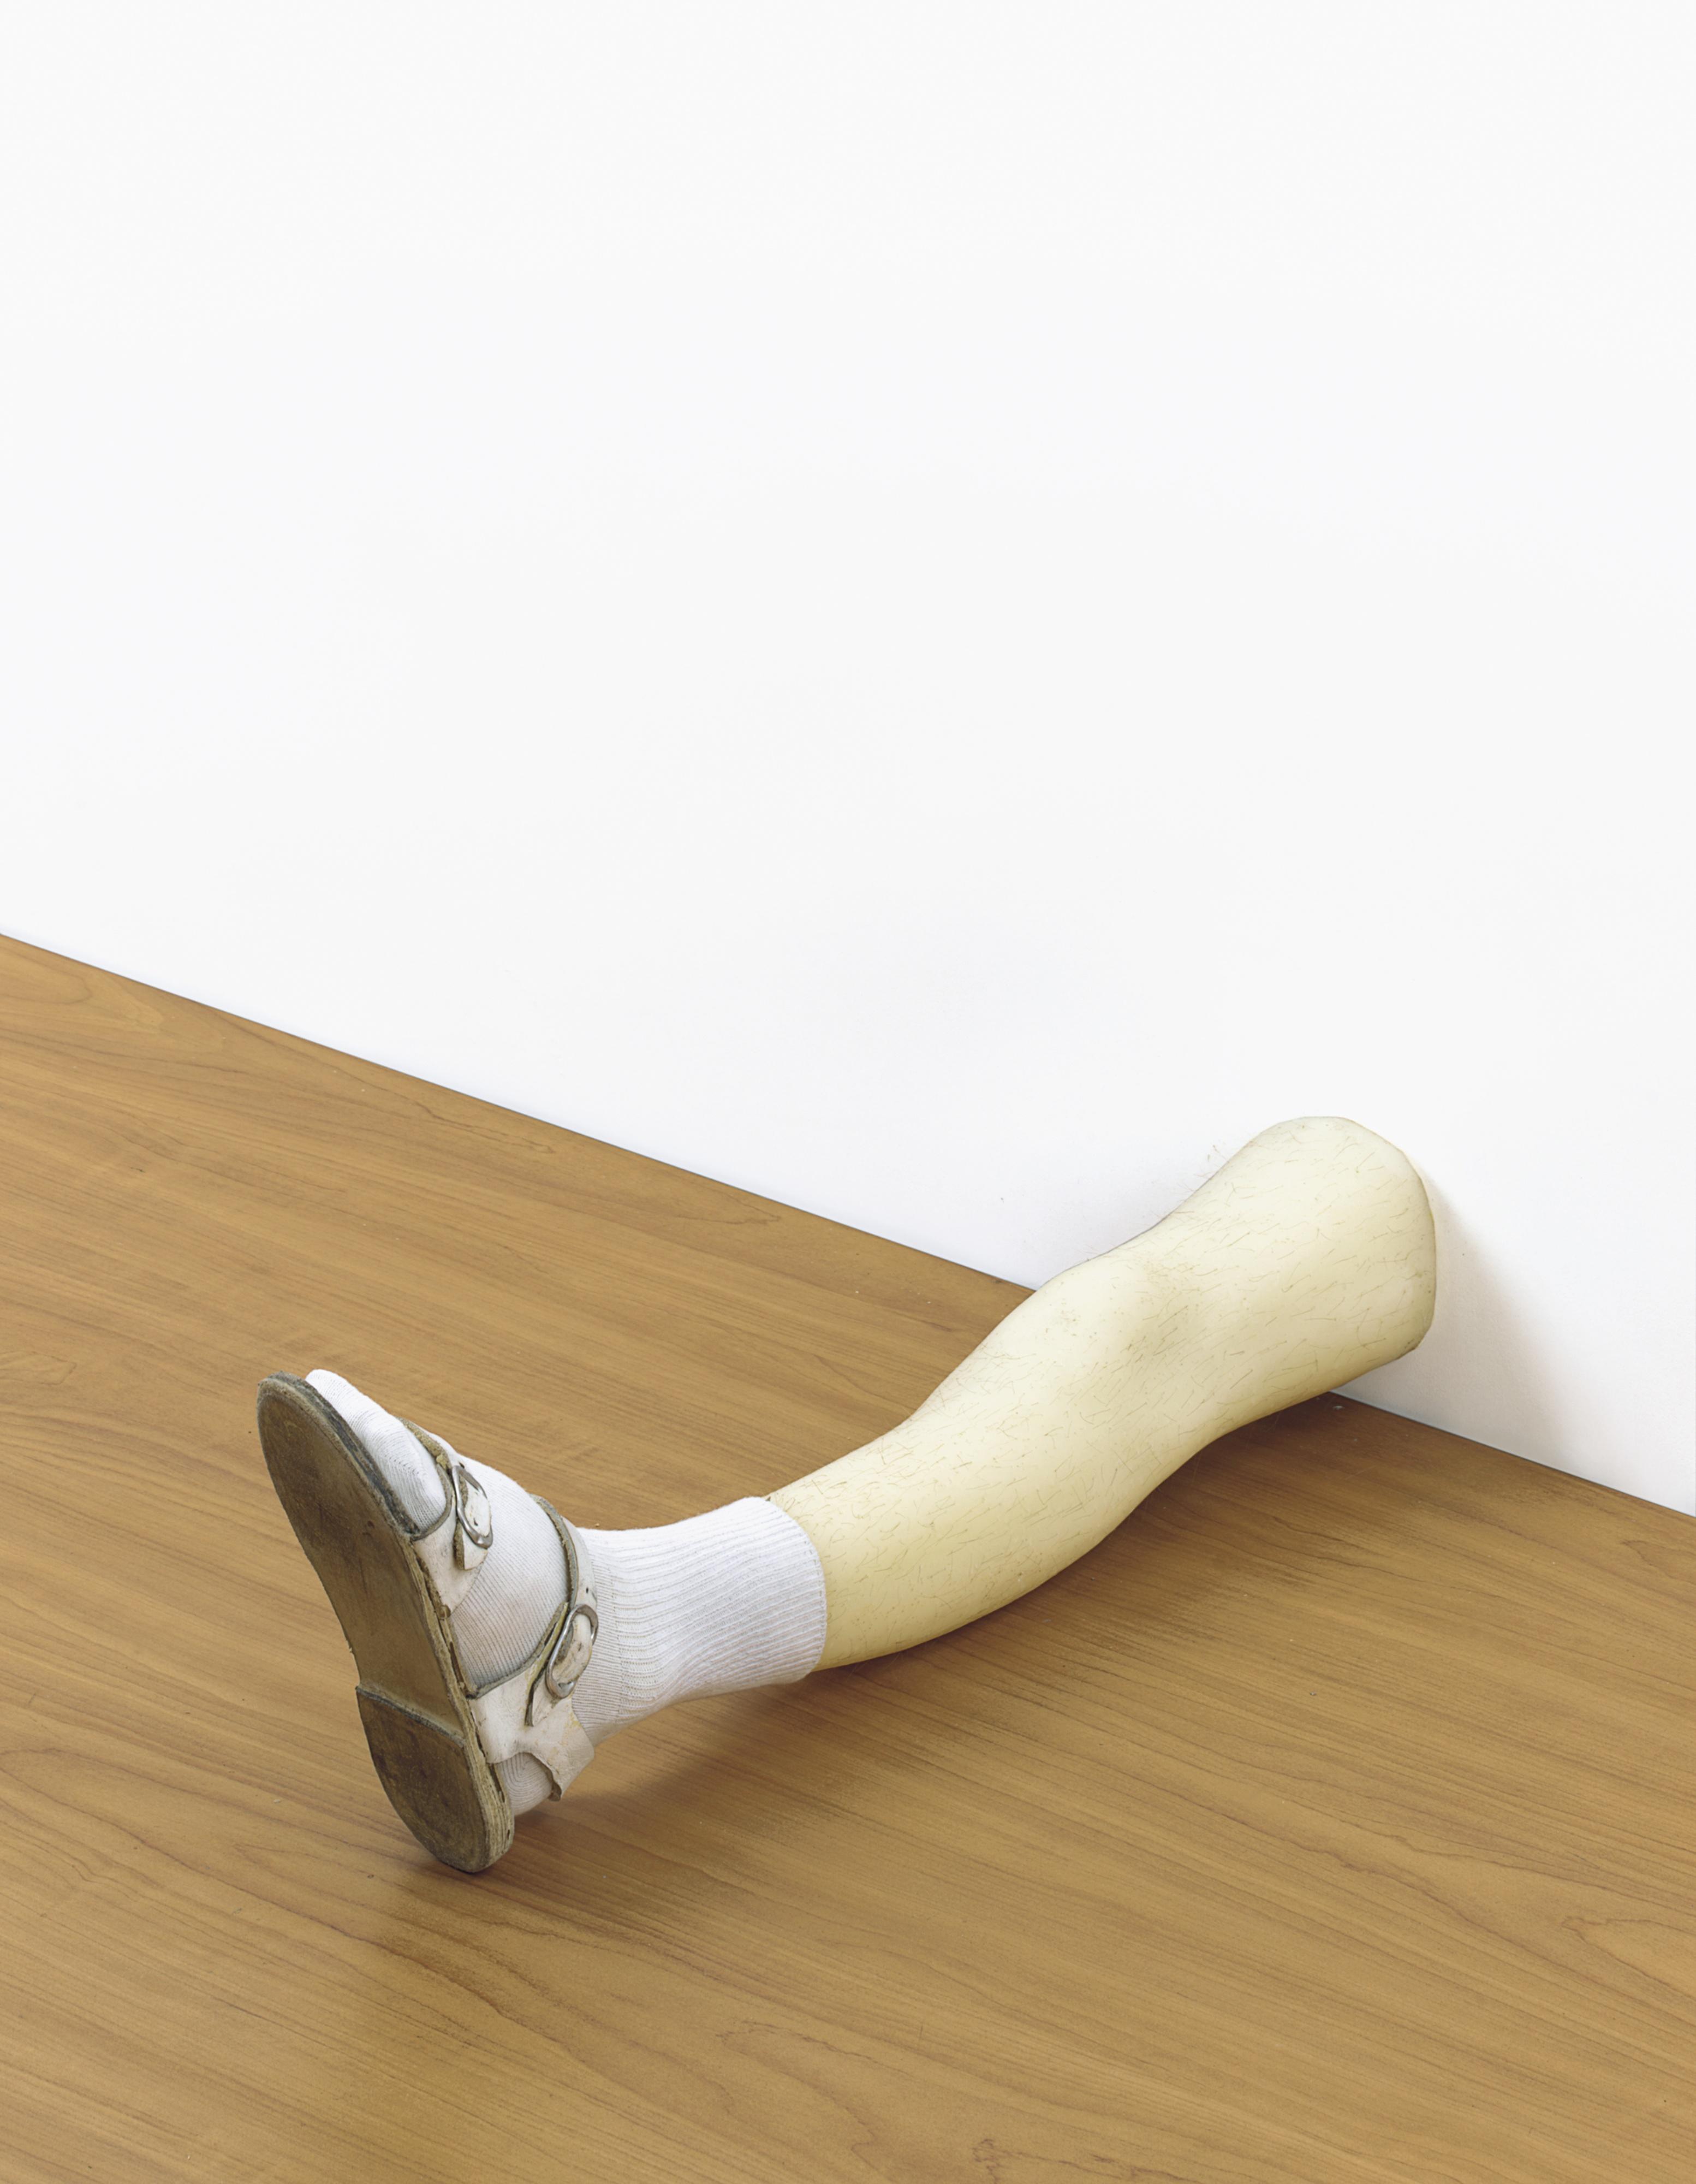 sculpture of a leg protrudes from a gallery wall